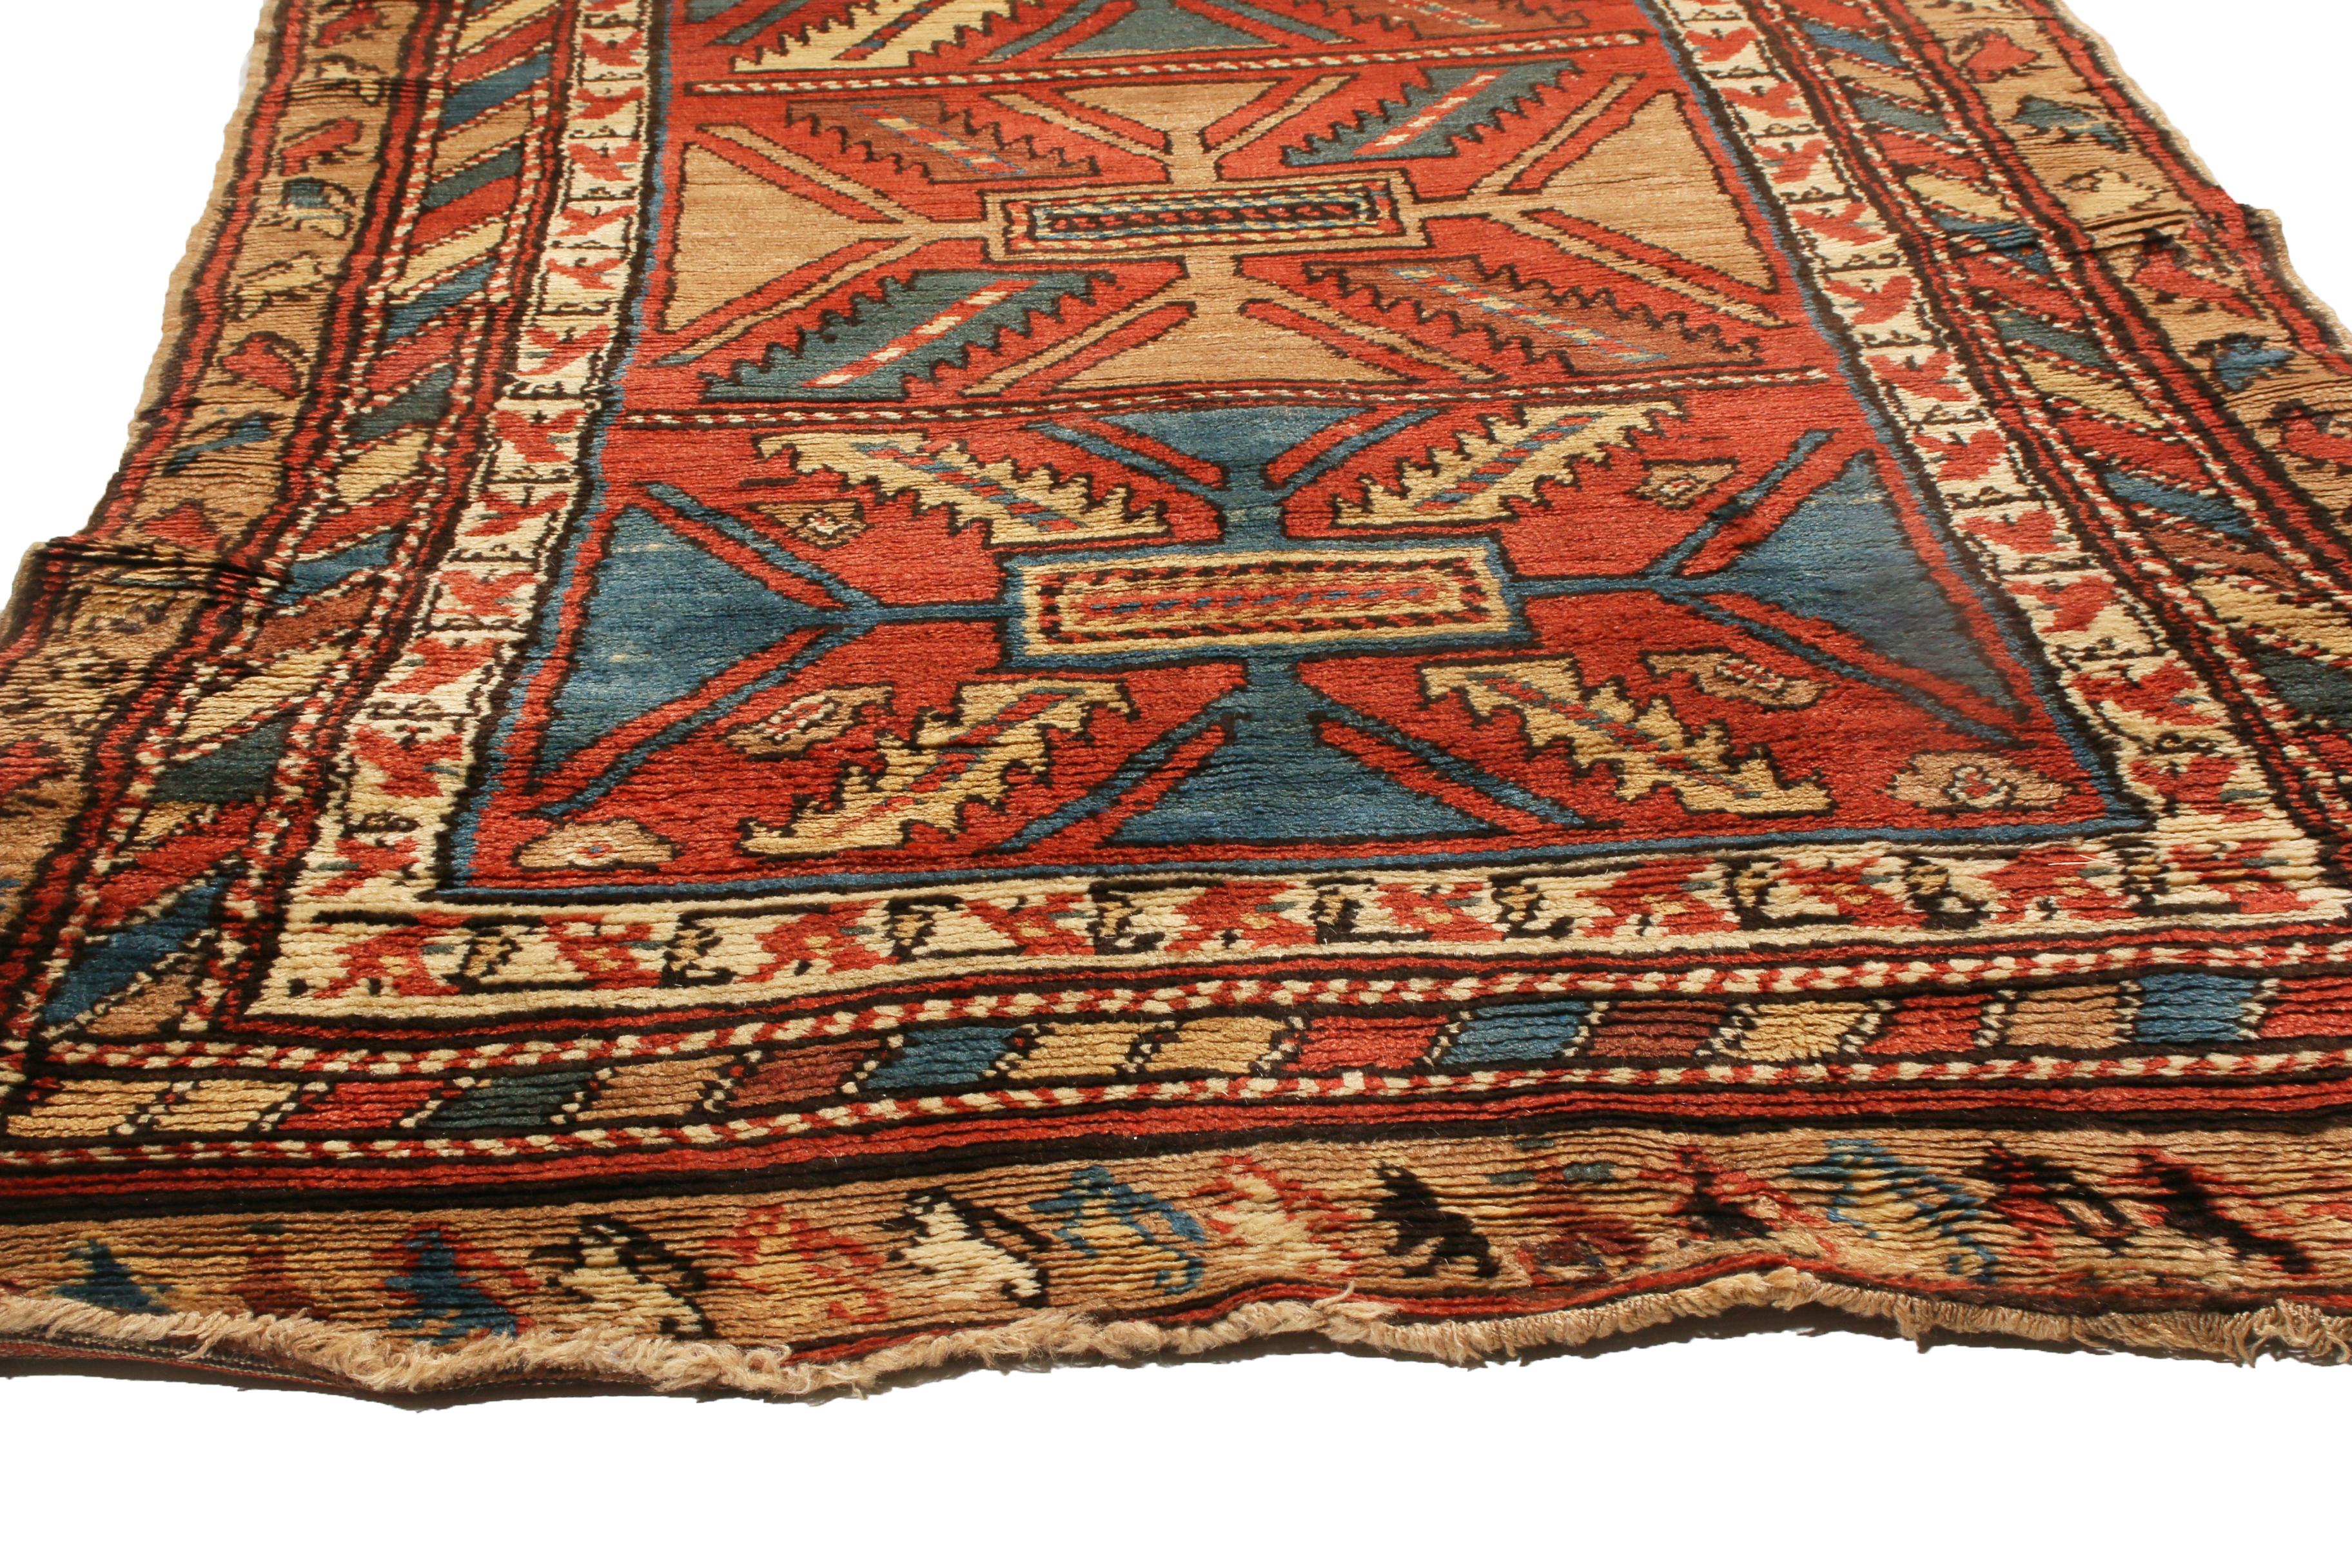 Early 20th Century Antique Bakhshaish Red and Blue Geometric Wool Persian Runner with Bronze